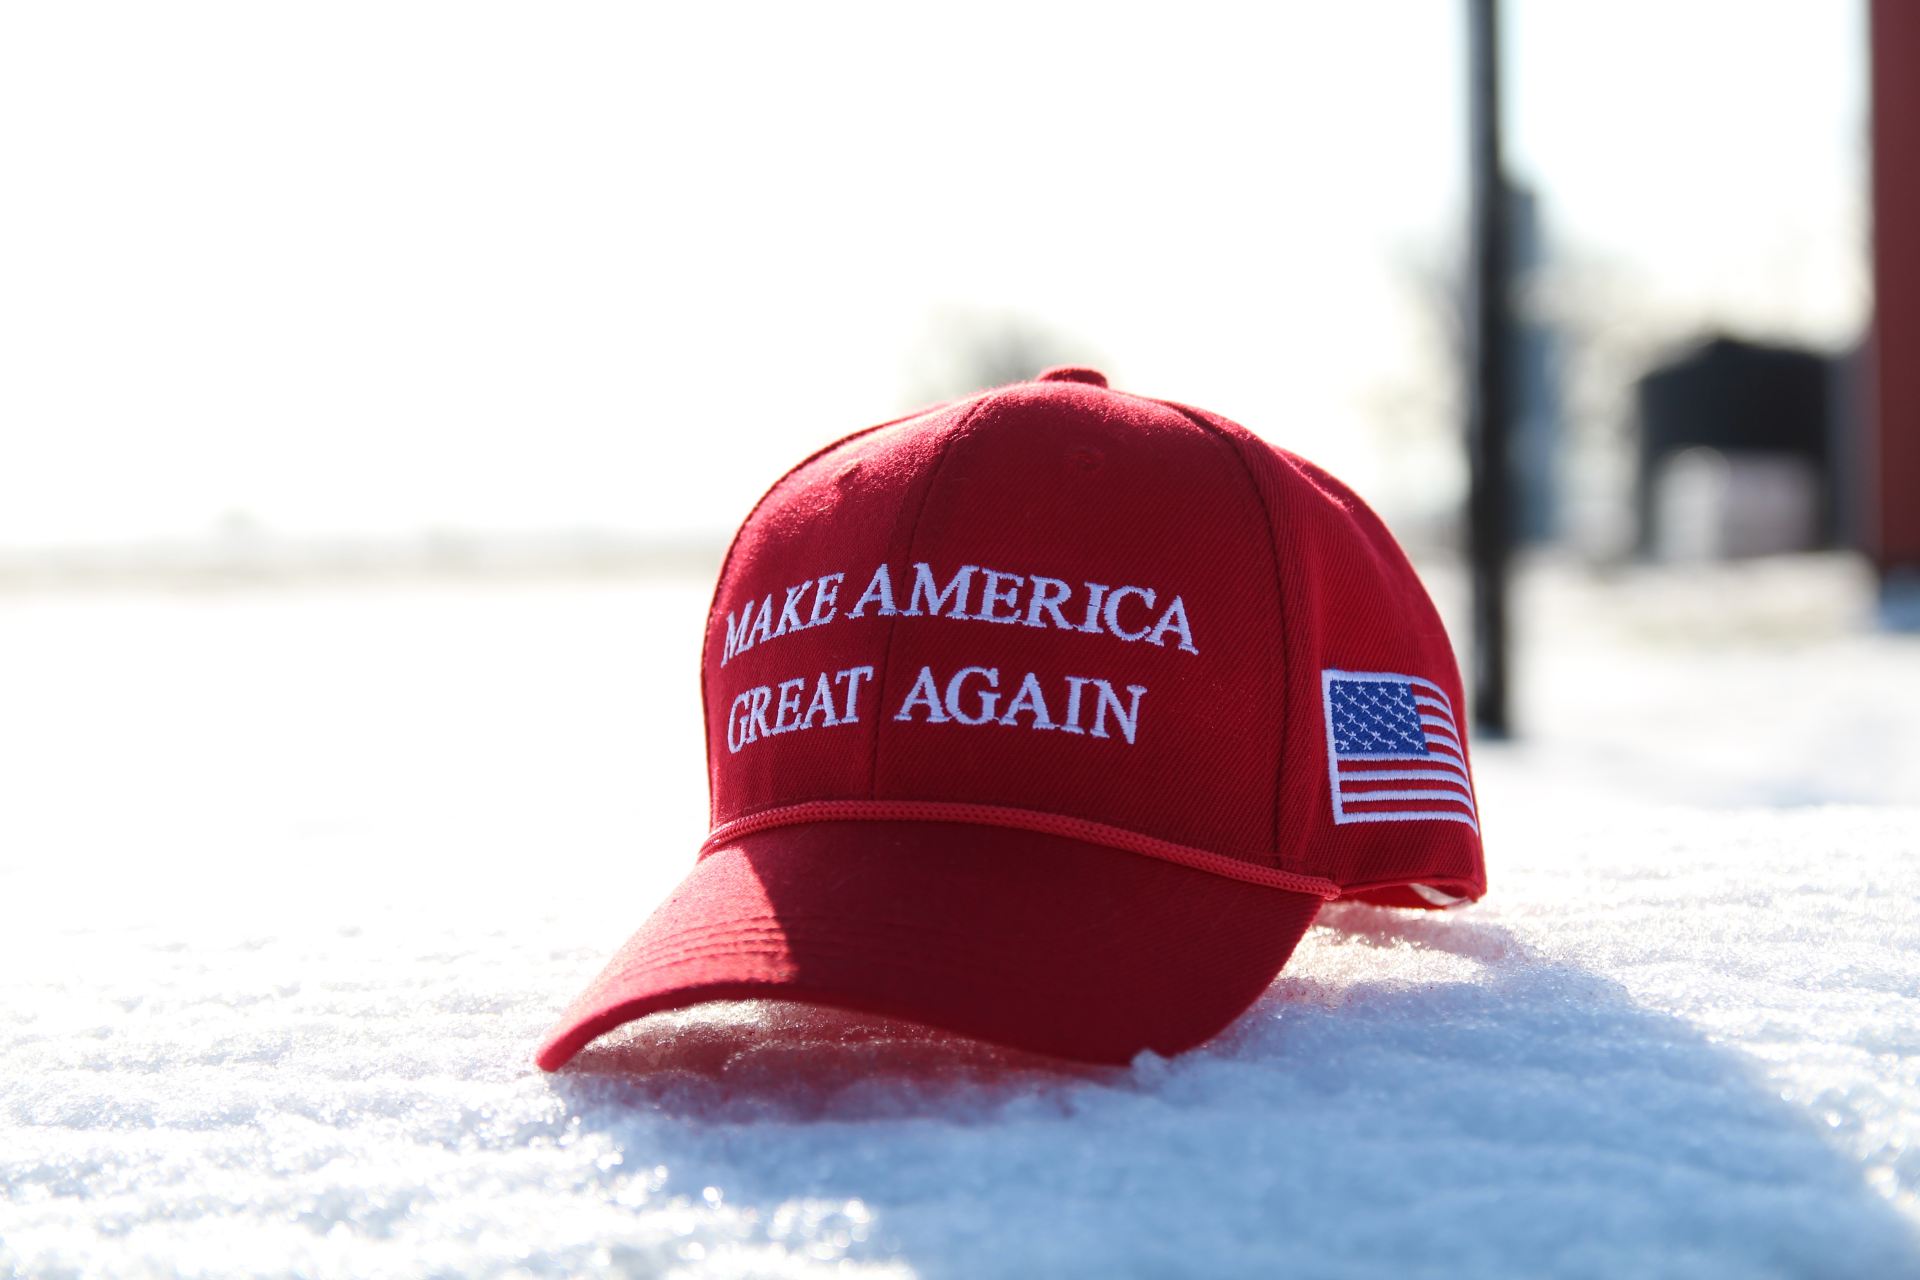 Beautiful hat! We’re going to keep fighting to Make America Great Again!🇺🇸🇺🇸